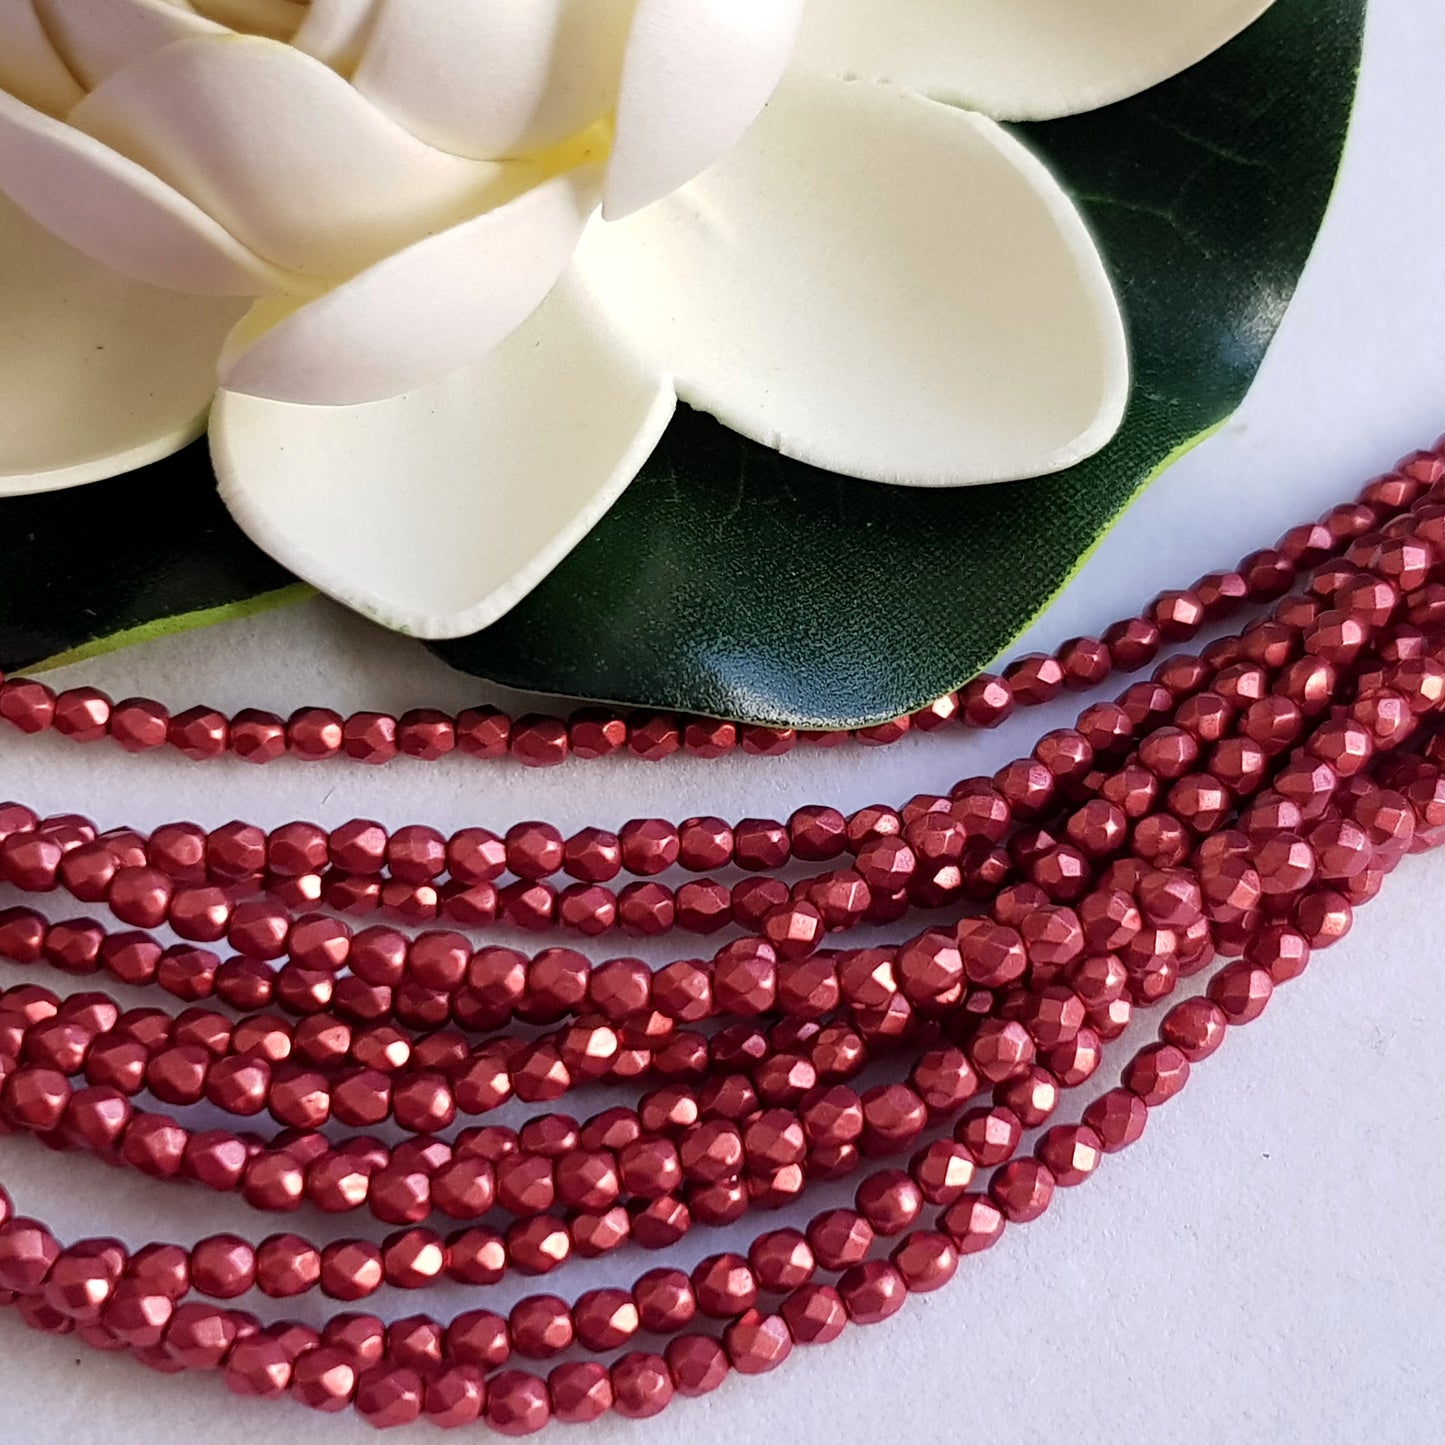 Czech Fire Polished 50 Bead Strand - Suede Gold Samba Red 3mm Round Faceted  |  FP-08A07-CB-03 | Beading Supply